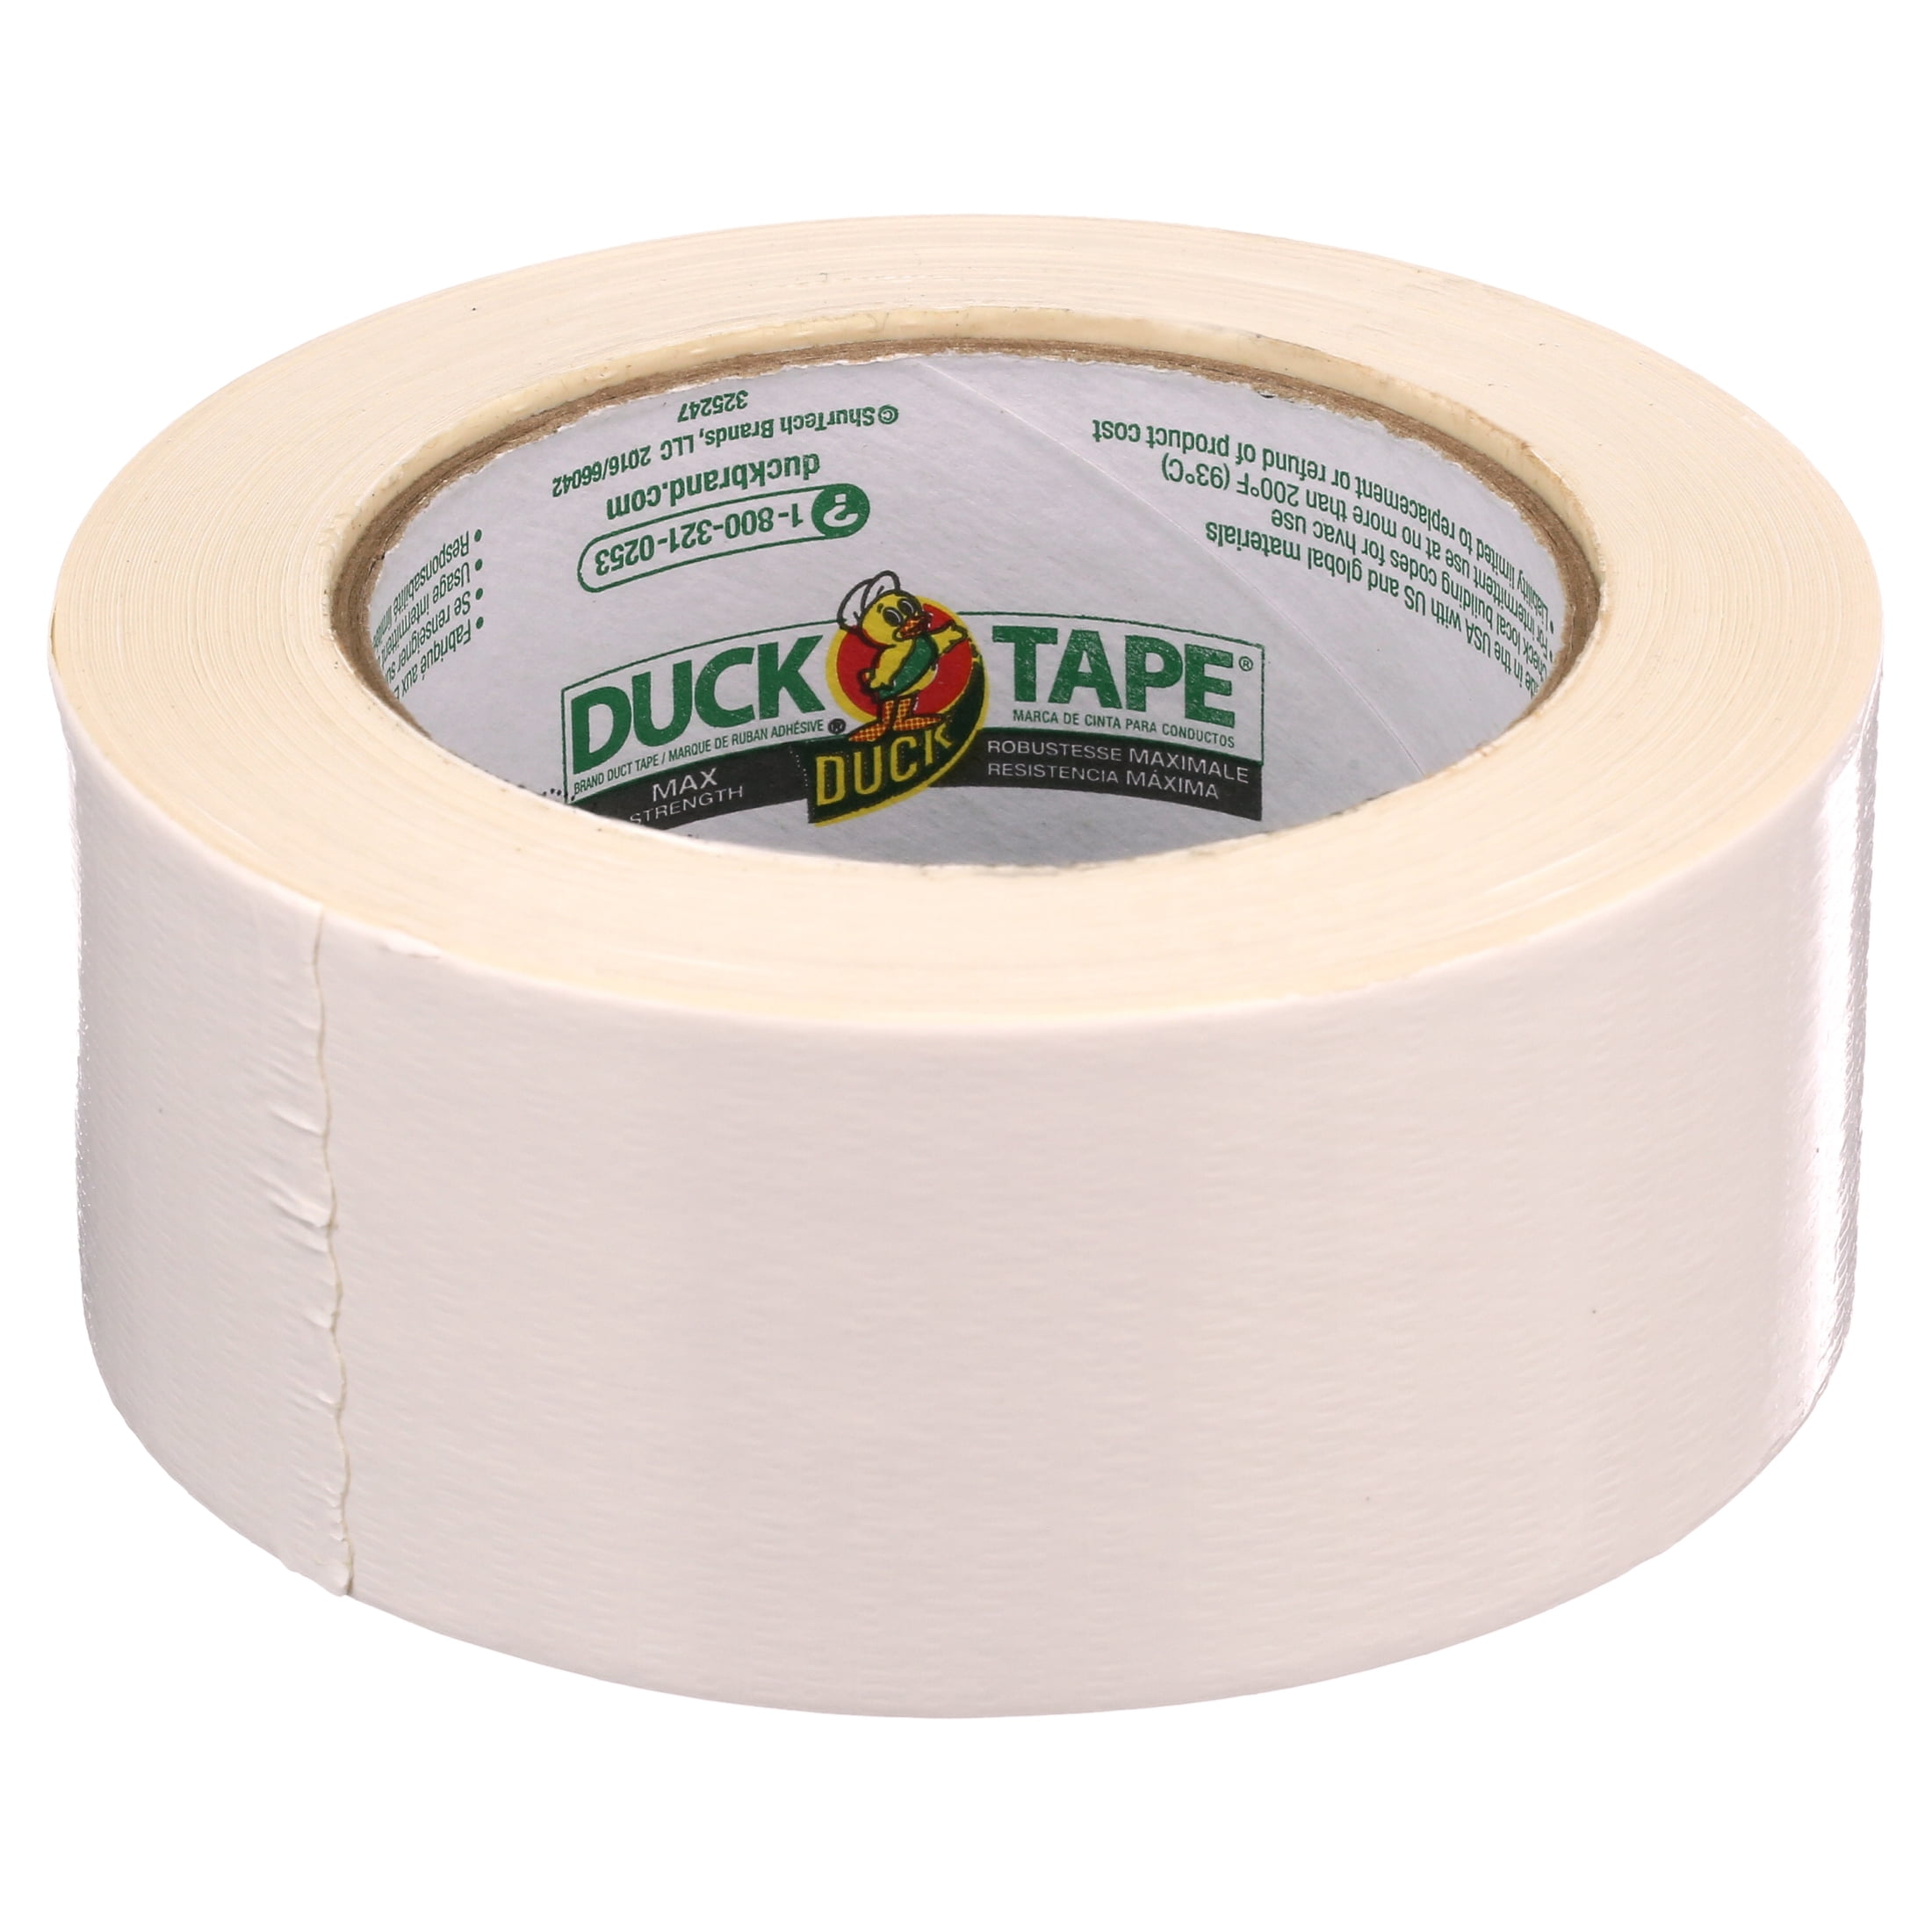 Duck Tape® Max Strength™ Duct Tape - White, 1.88 in x 35 YD - Ralphs